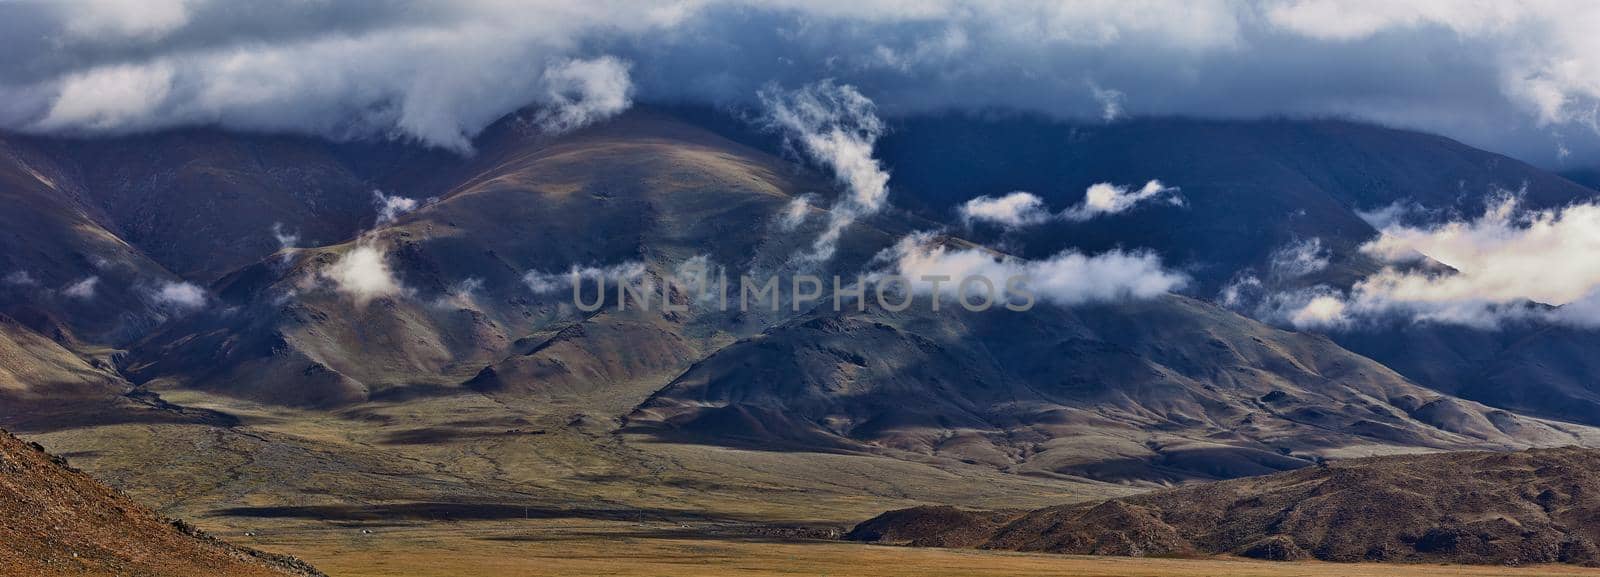 Pasture in the mountains of Mongolia. Landscapes of Mongolia, panorama of mountains in the Gobi desert by EvgeniyQW